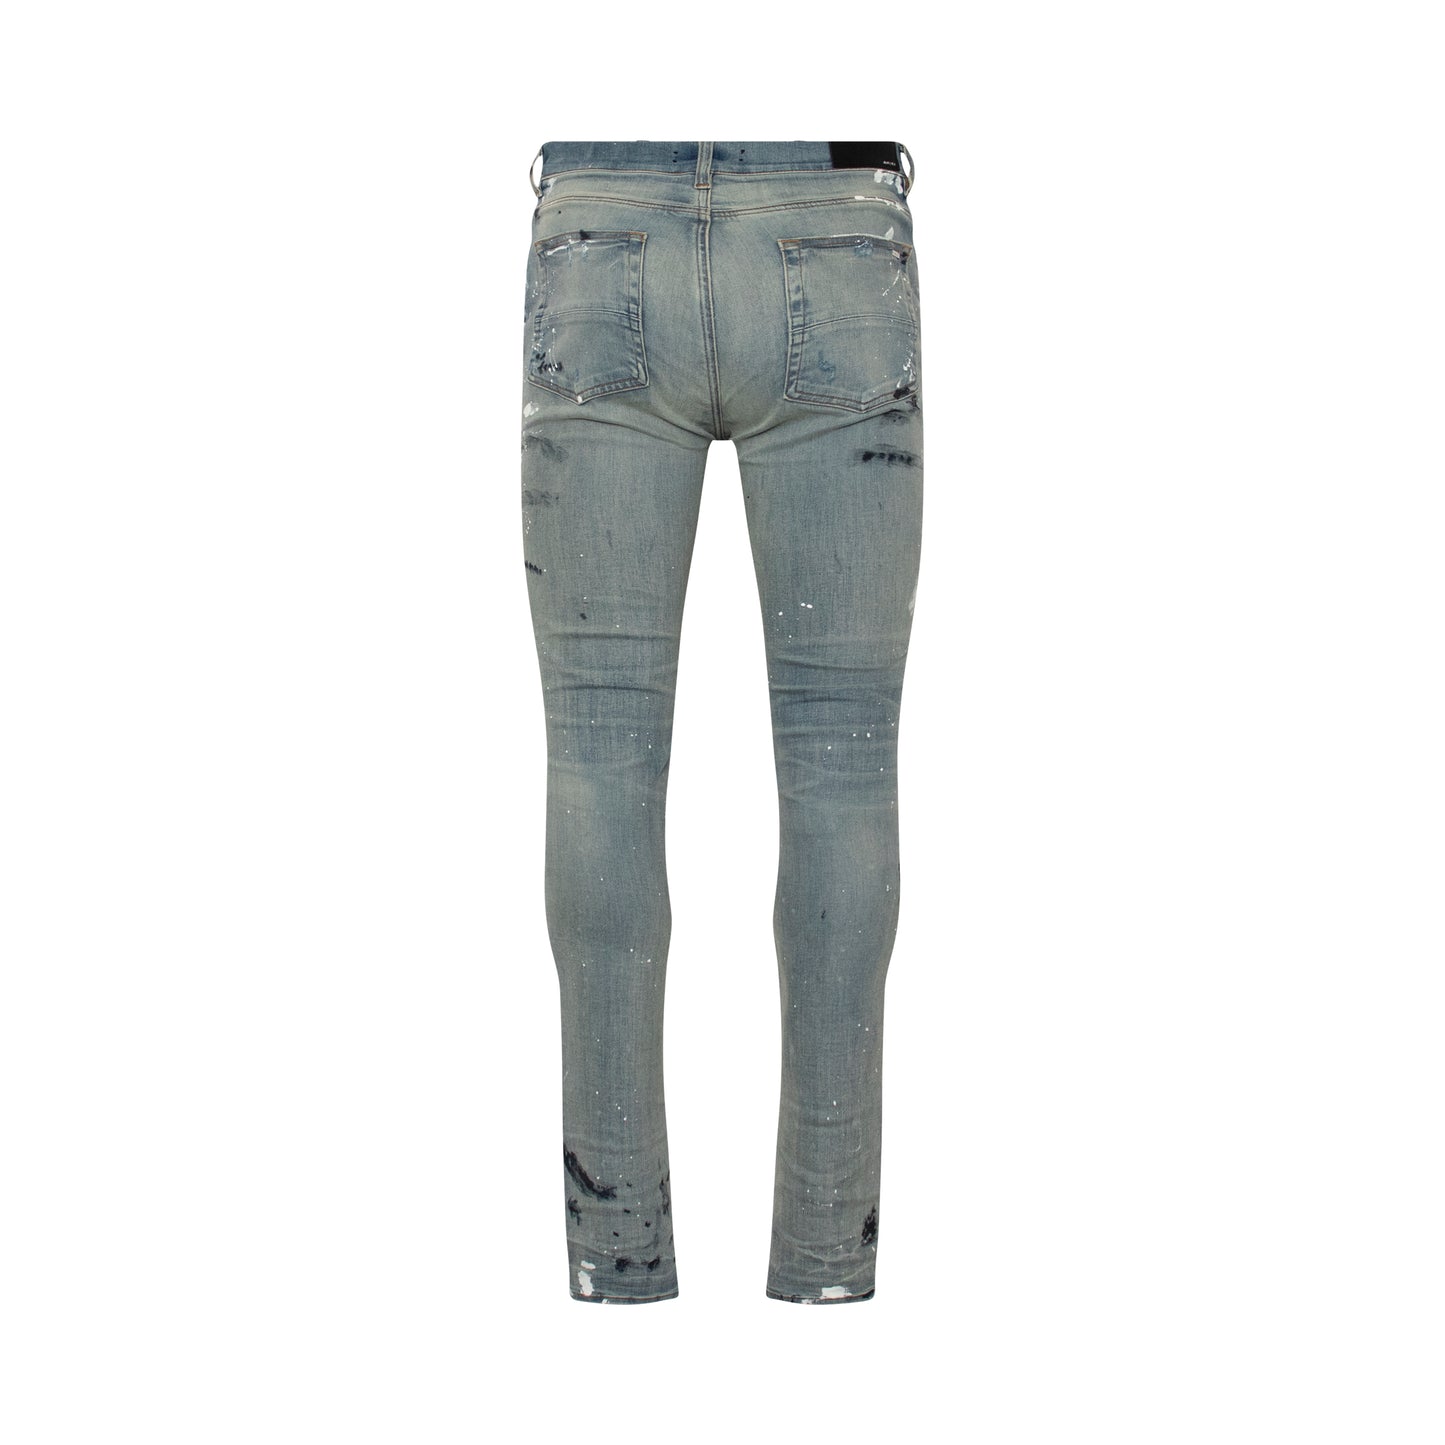 Hand Painted Slit Knee Jeans in Indigo